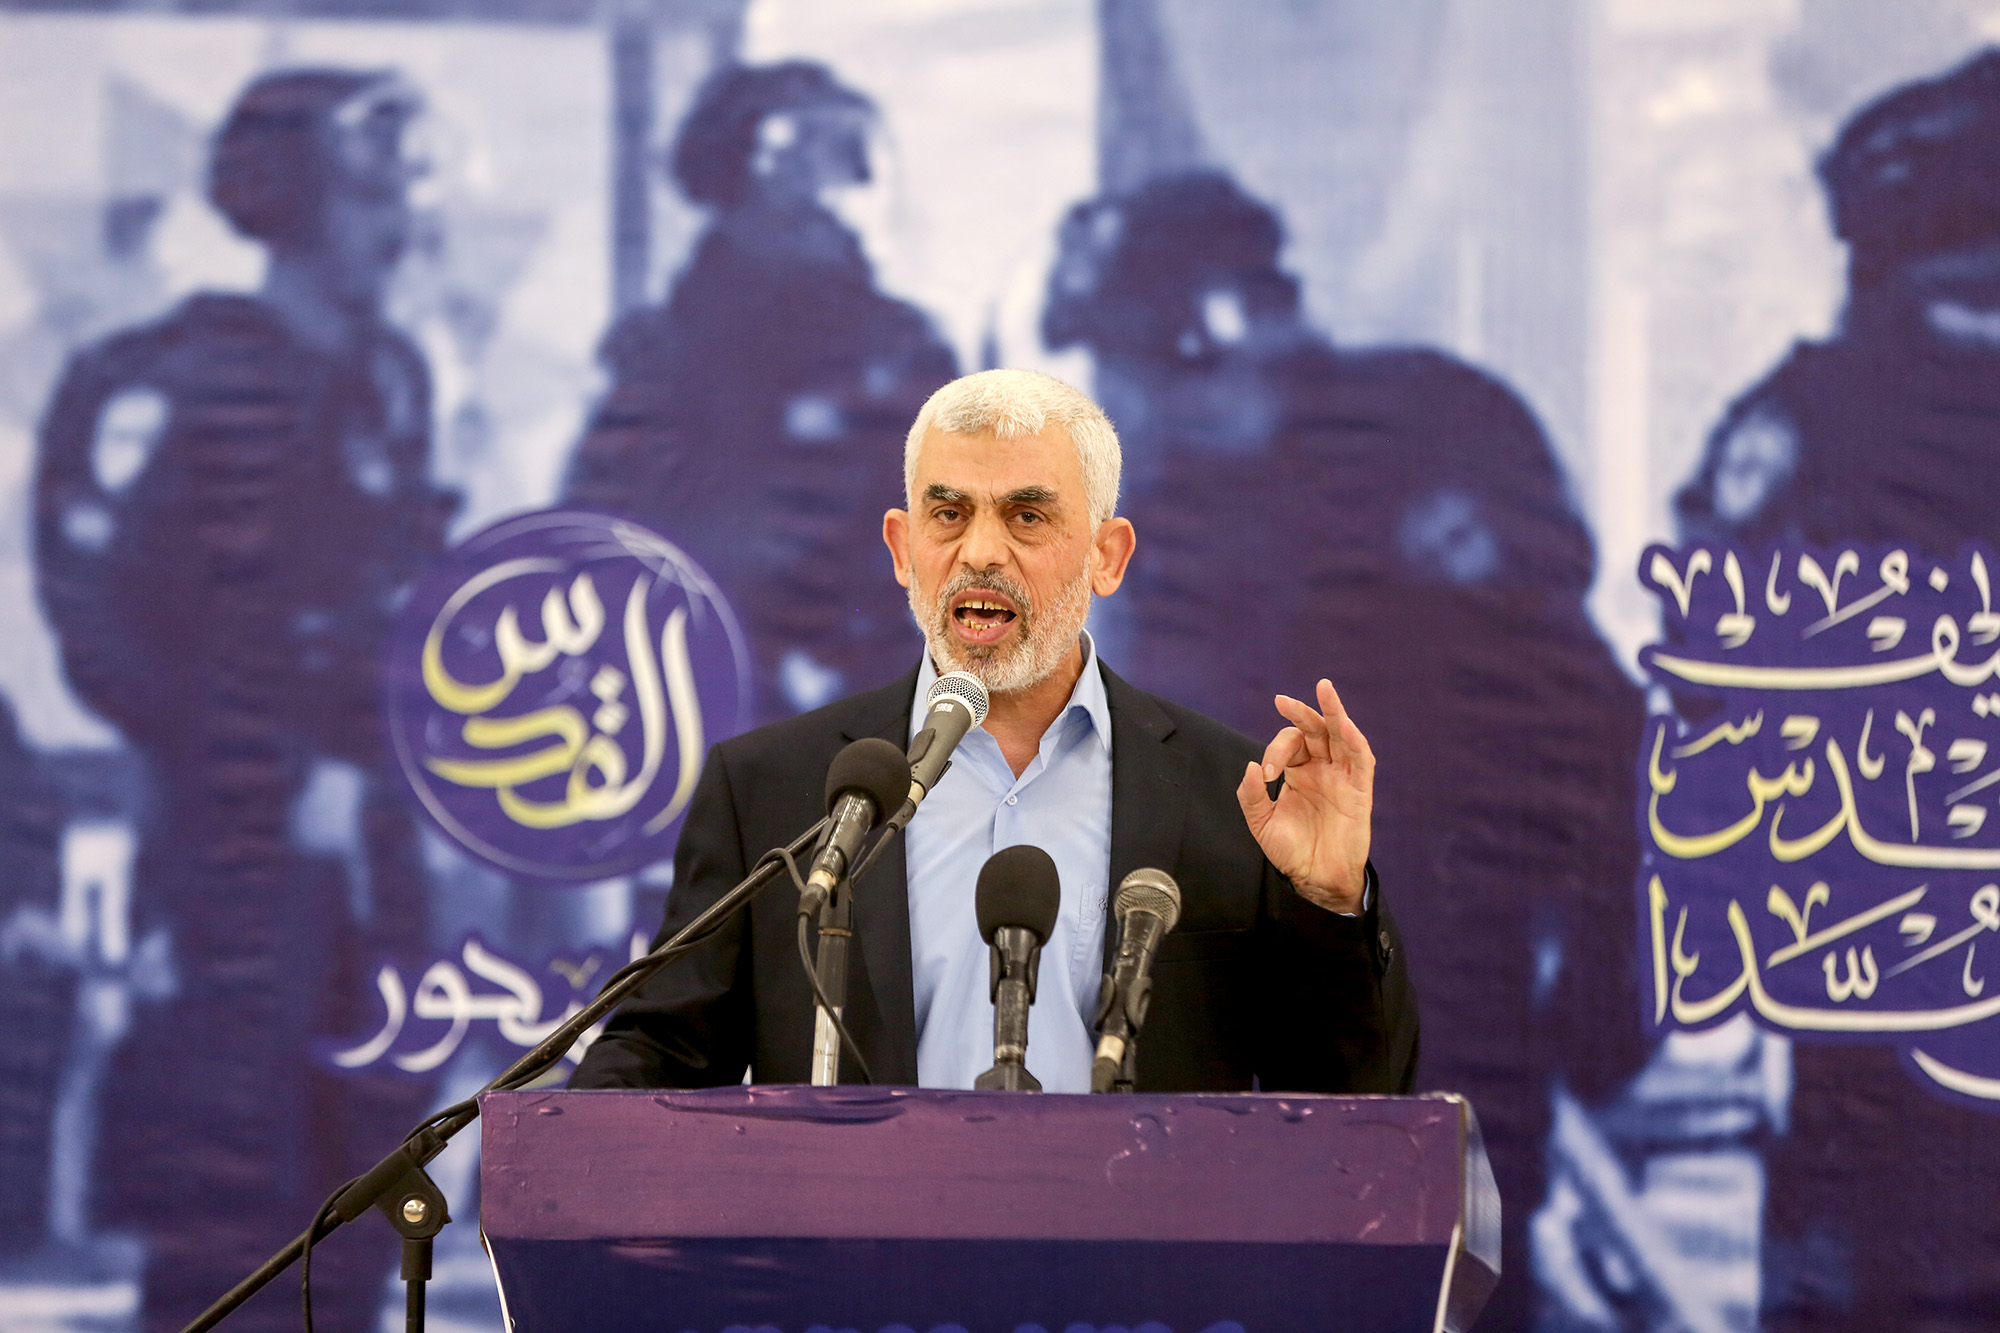 Yahya Sinwar, the political head of Hamas in Gaza, speaks at an event in Gaza on April 30, 2022. 